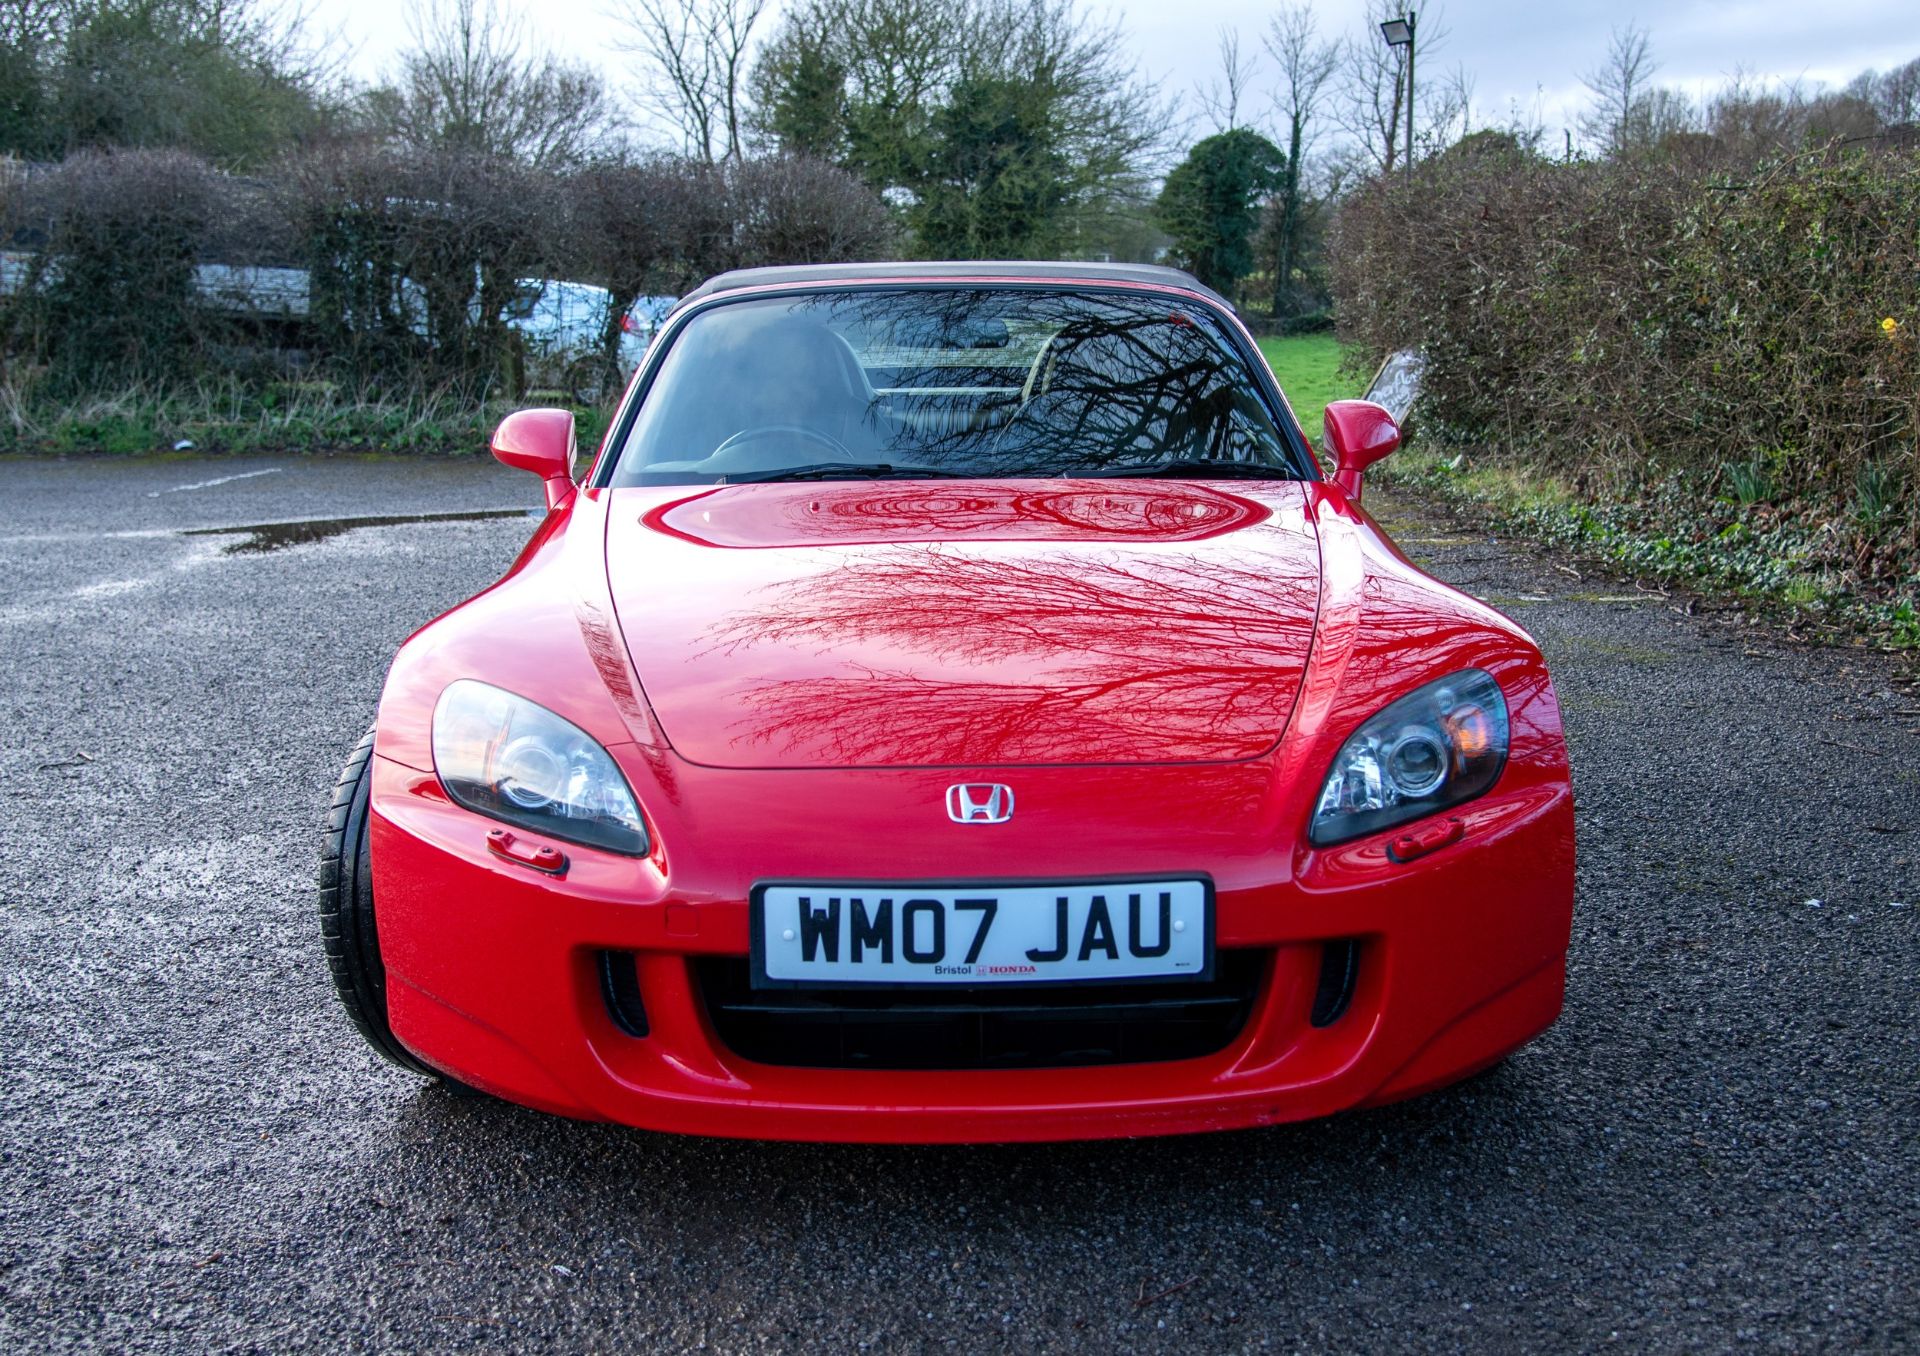 2007 HONDA S2000 Registration Number: WM07 JAU Chassis Number: JHMAP11207S200009 Recorded Mileage: - Image 4 of 26